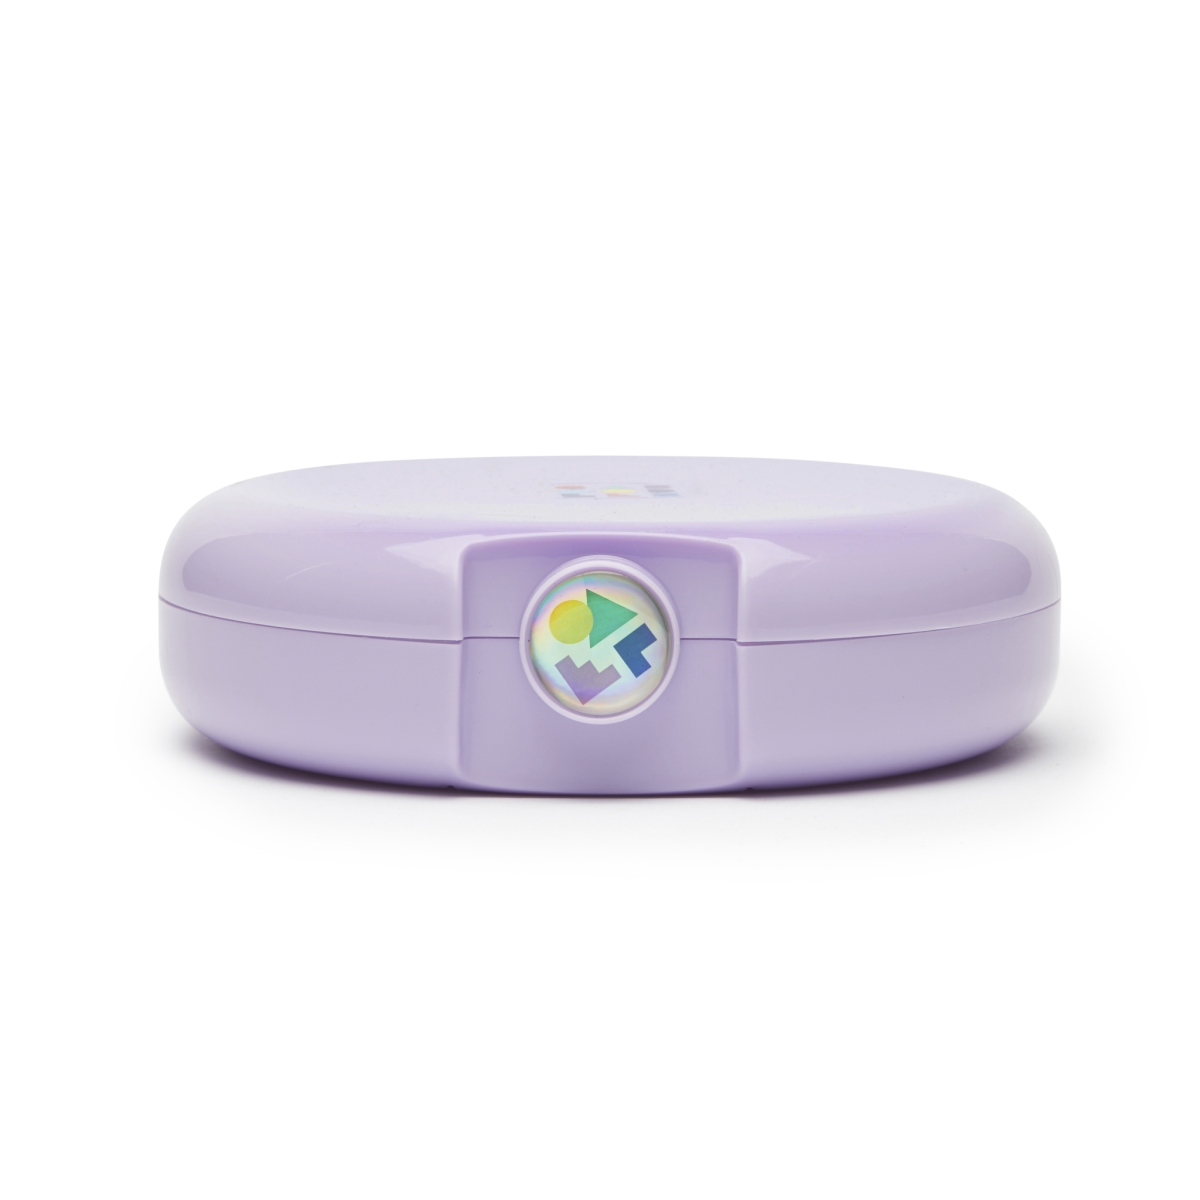 Cab58604a Cosmic Cosmetic Compact, Purple